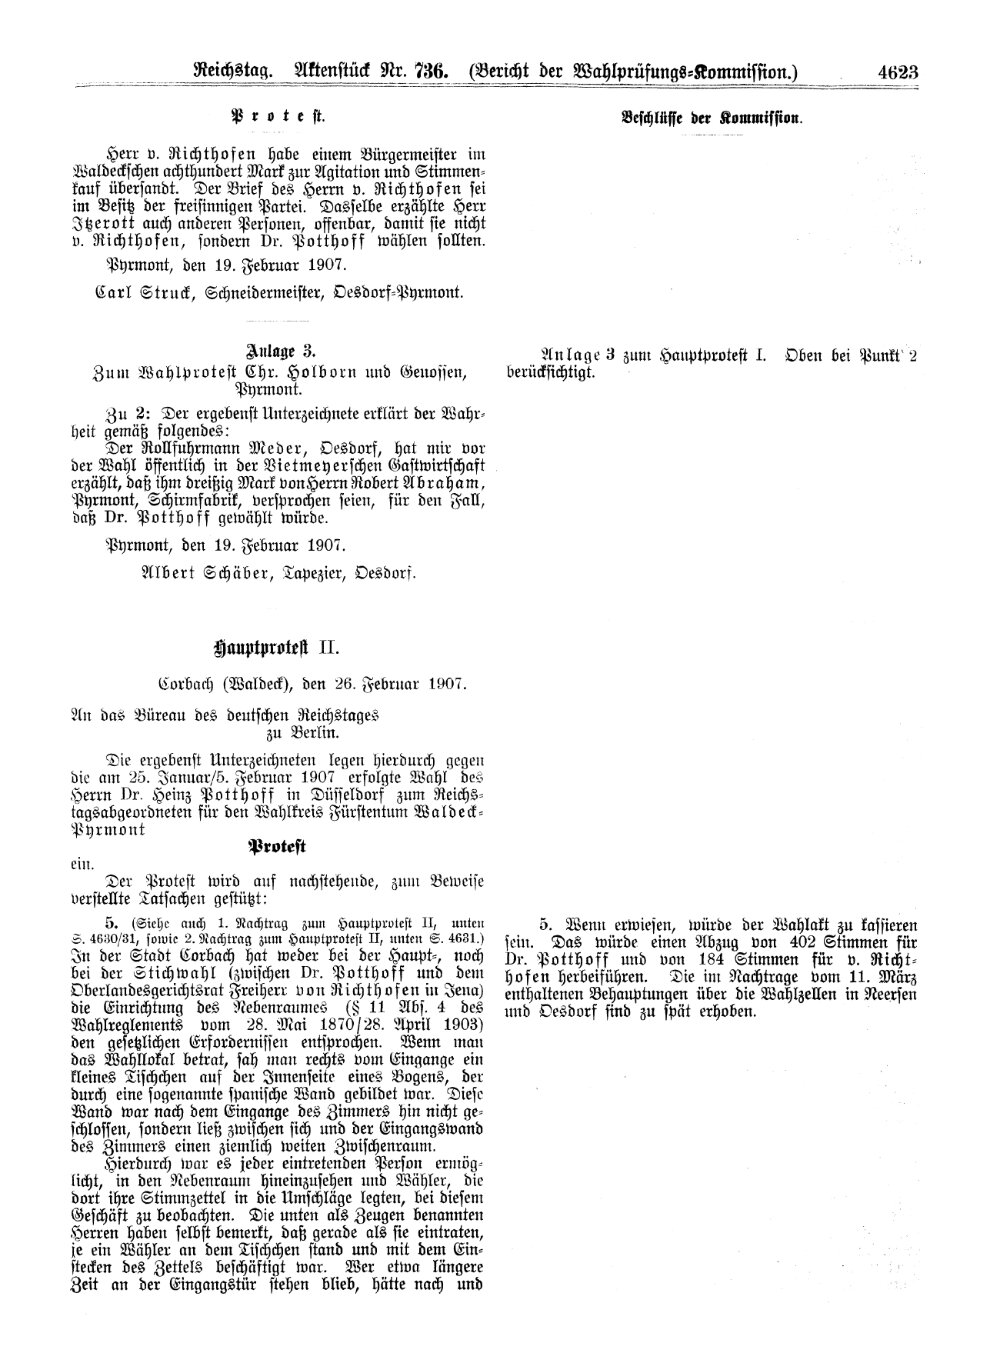 Scan of page 4623